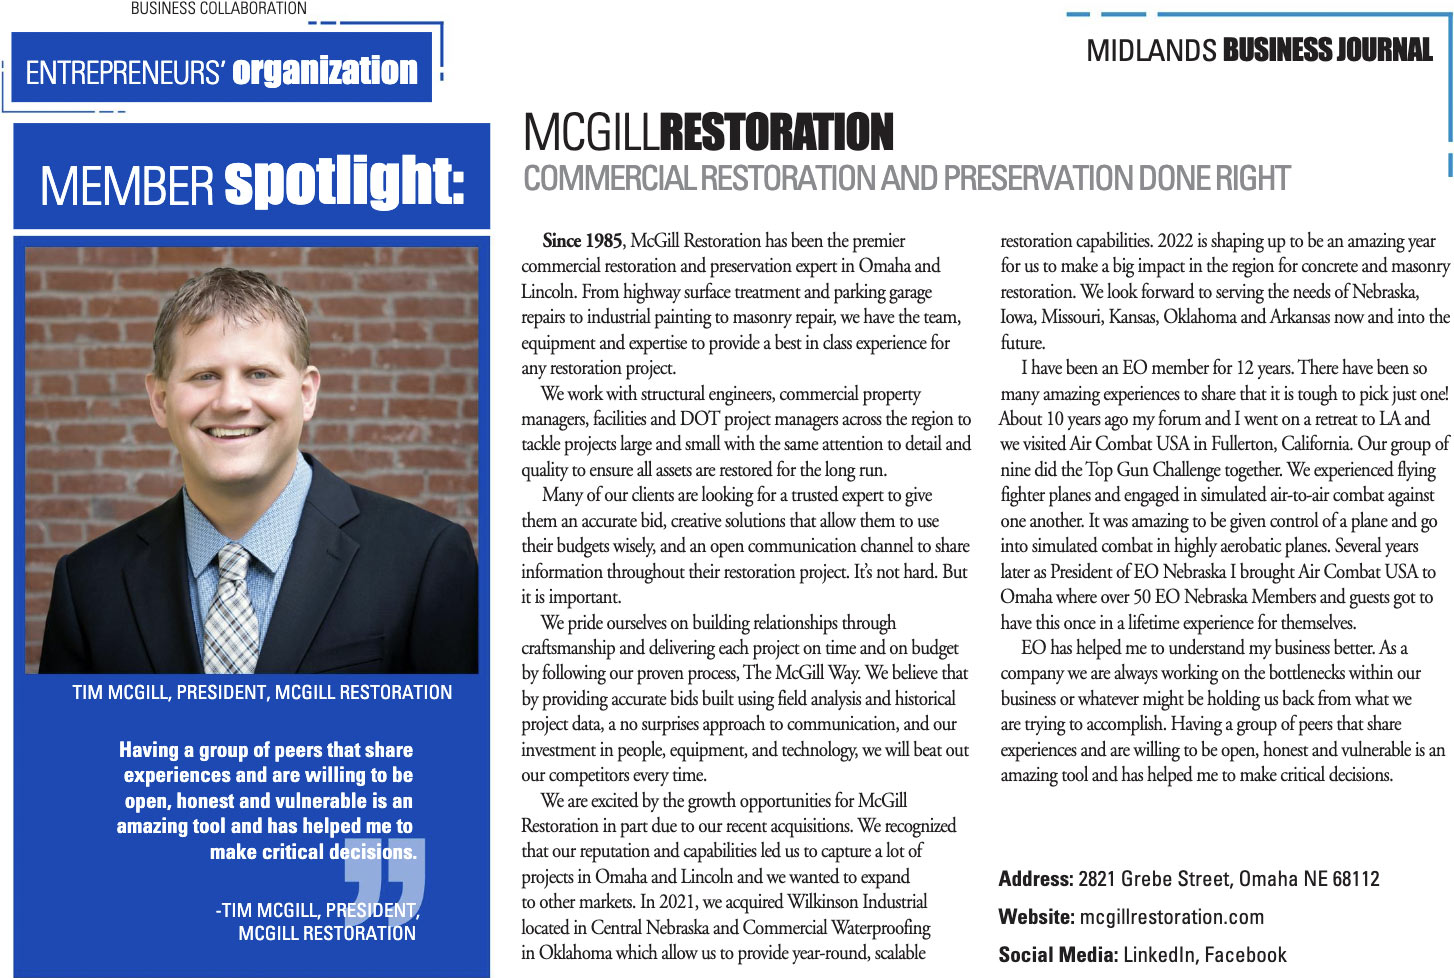 McGill Restoration article in Midlands Business Journal